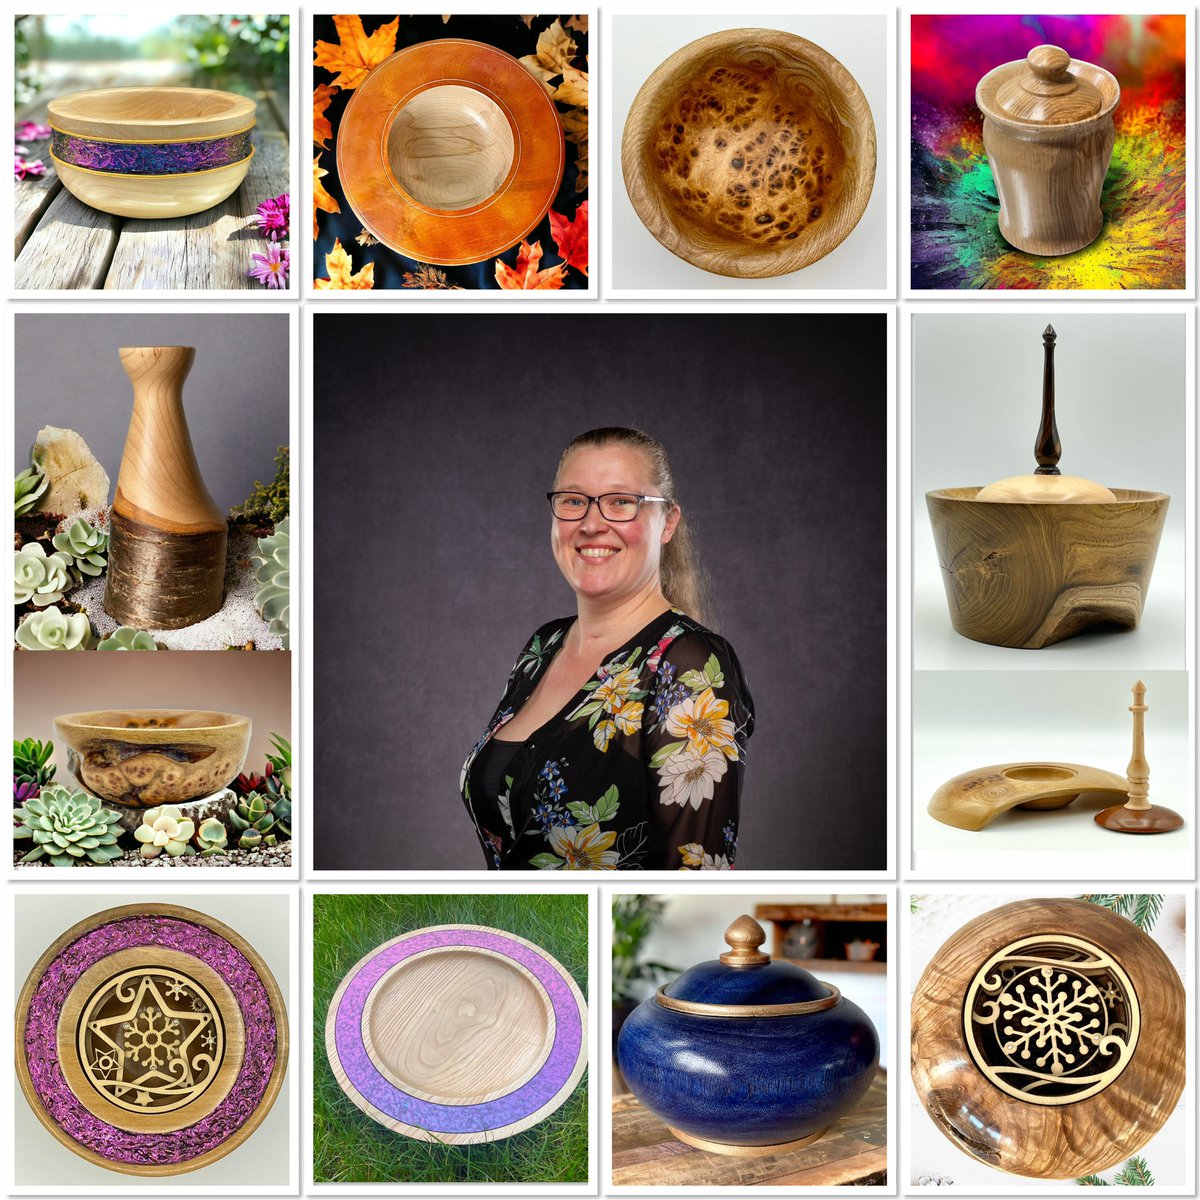 Hi🙋🏼‍♀️ I’m Victoria, taught by my professional woodturner husband @clocksncandles, I am also a woodturner! Creative & award-winning, I specialise in high quality wooden art for your home & office space davenportshandmade.co.uk/product-catego… #woodturning #SmallBusiness #Handmade #homedecor #SBS